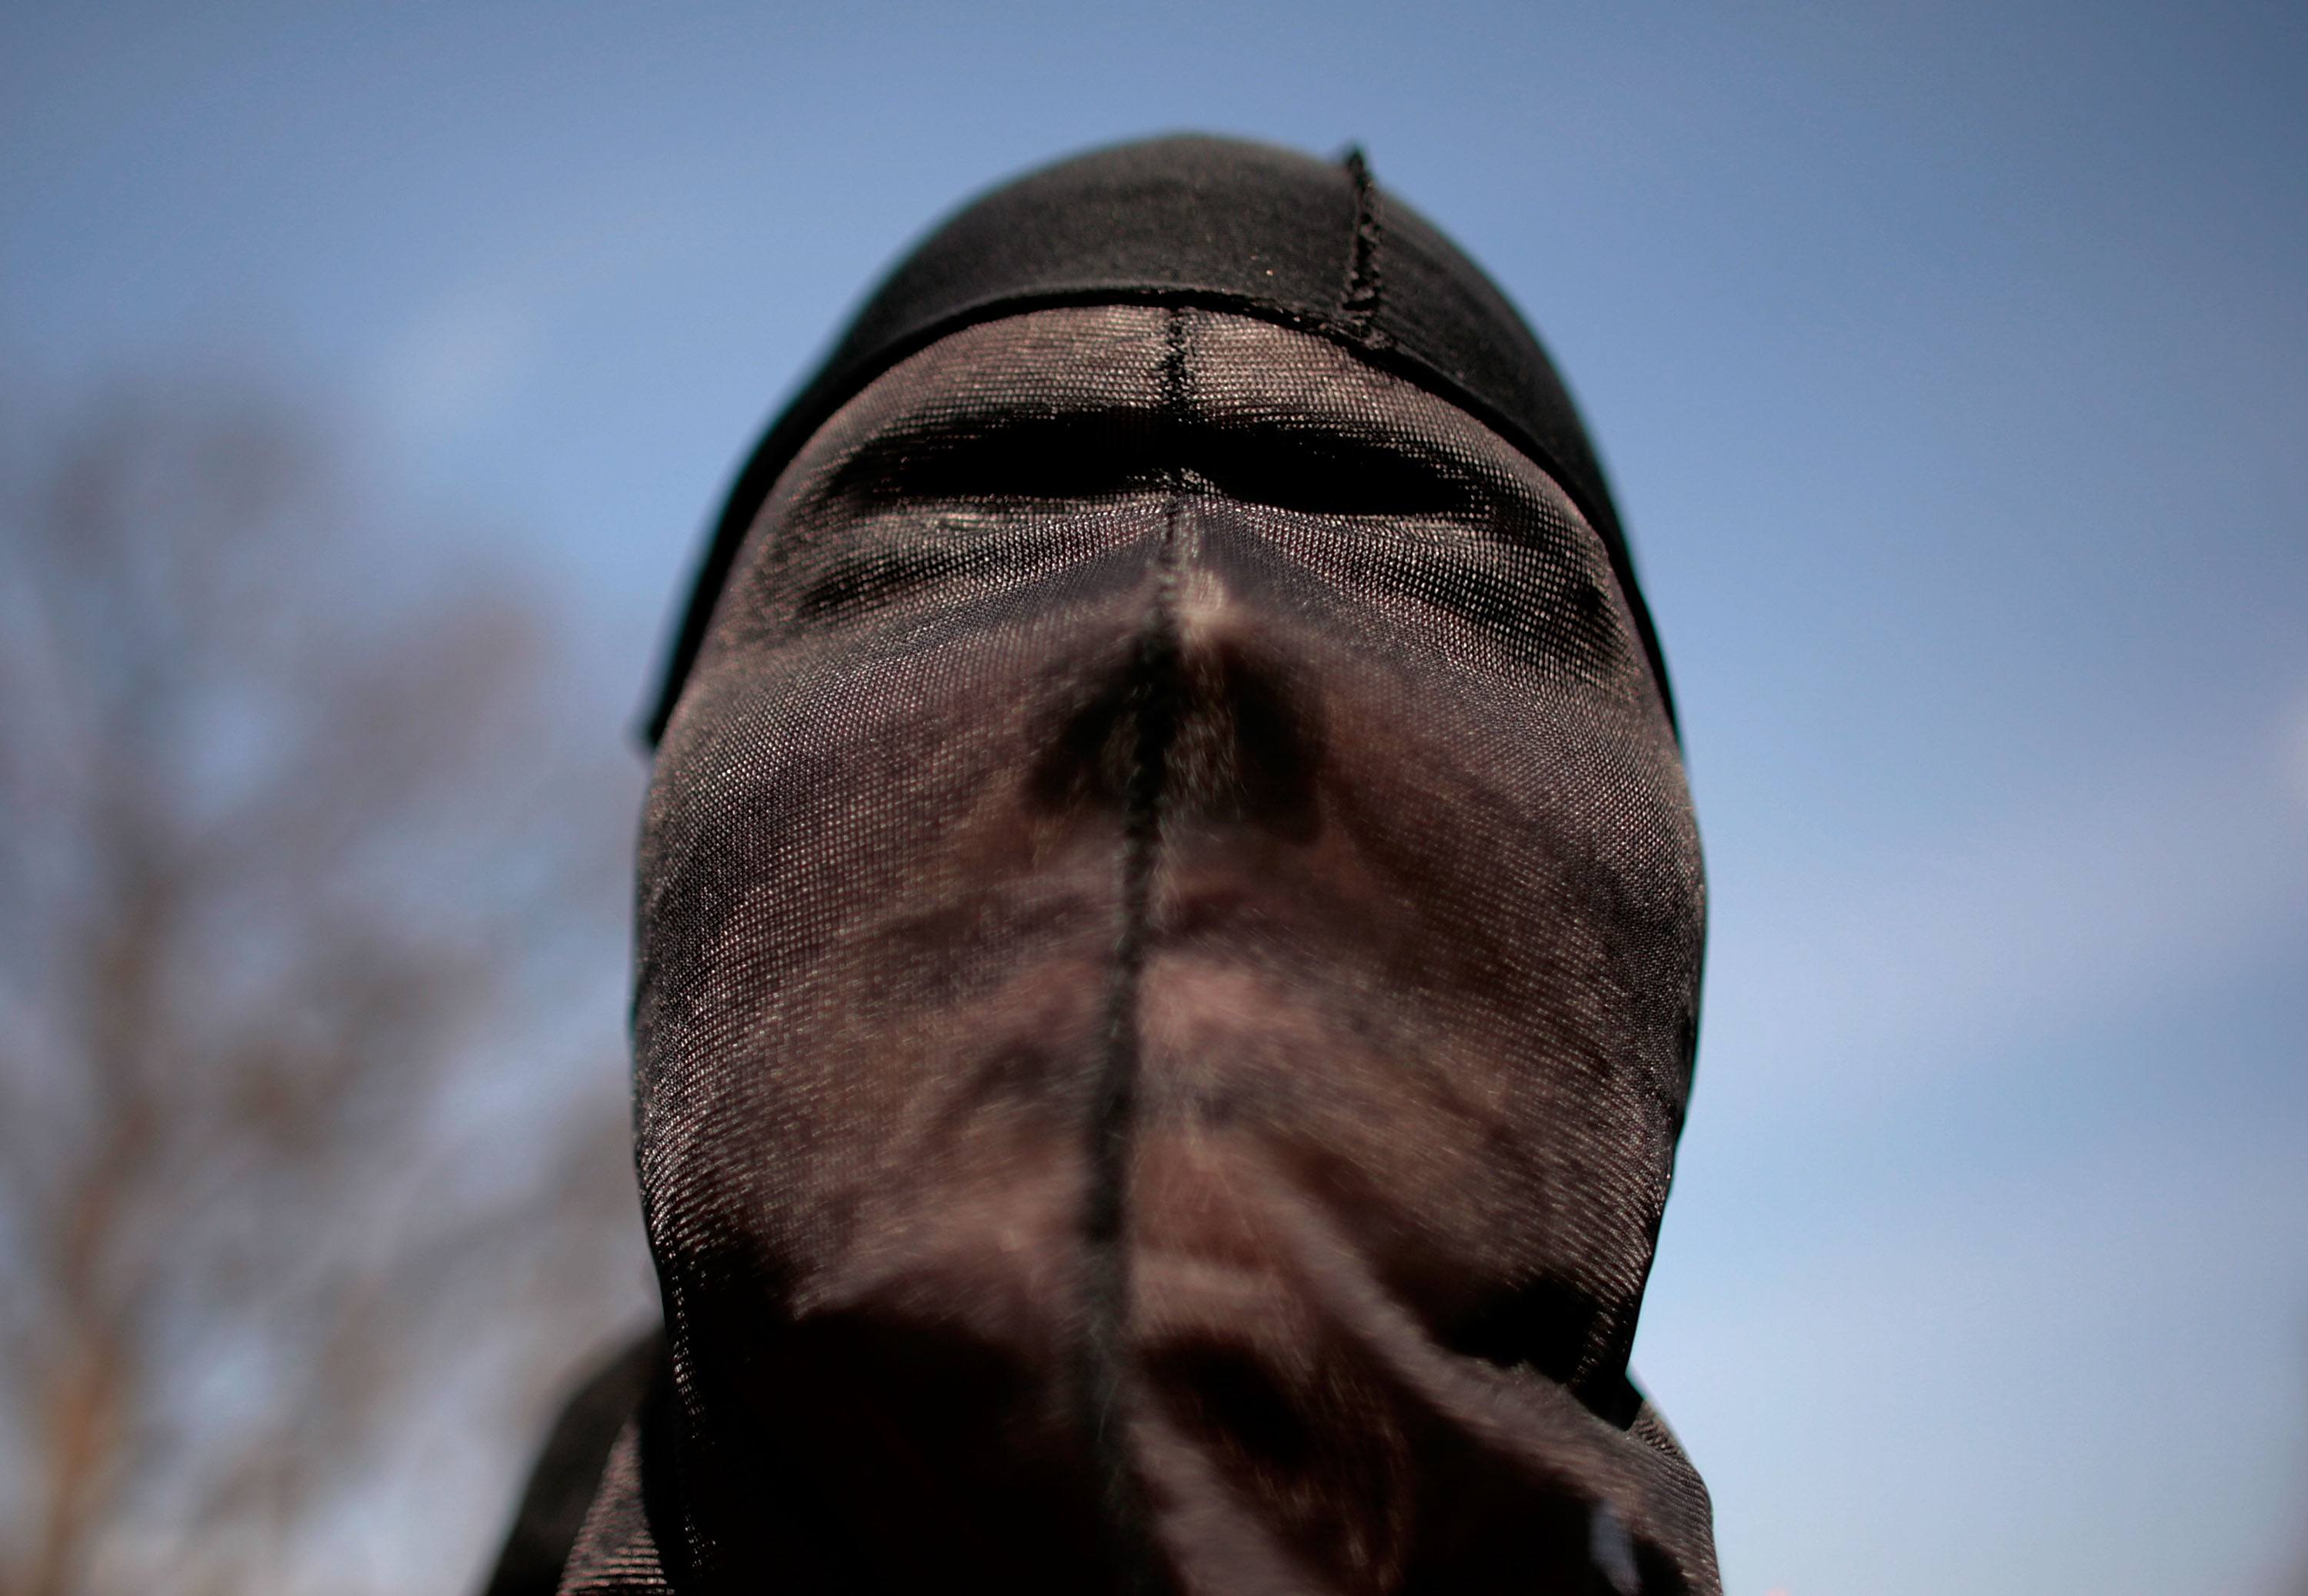 A demonstrator dresses as a "detainee" during a rally to "demand Congressional action to stop torture"